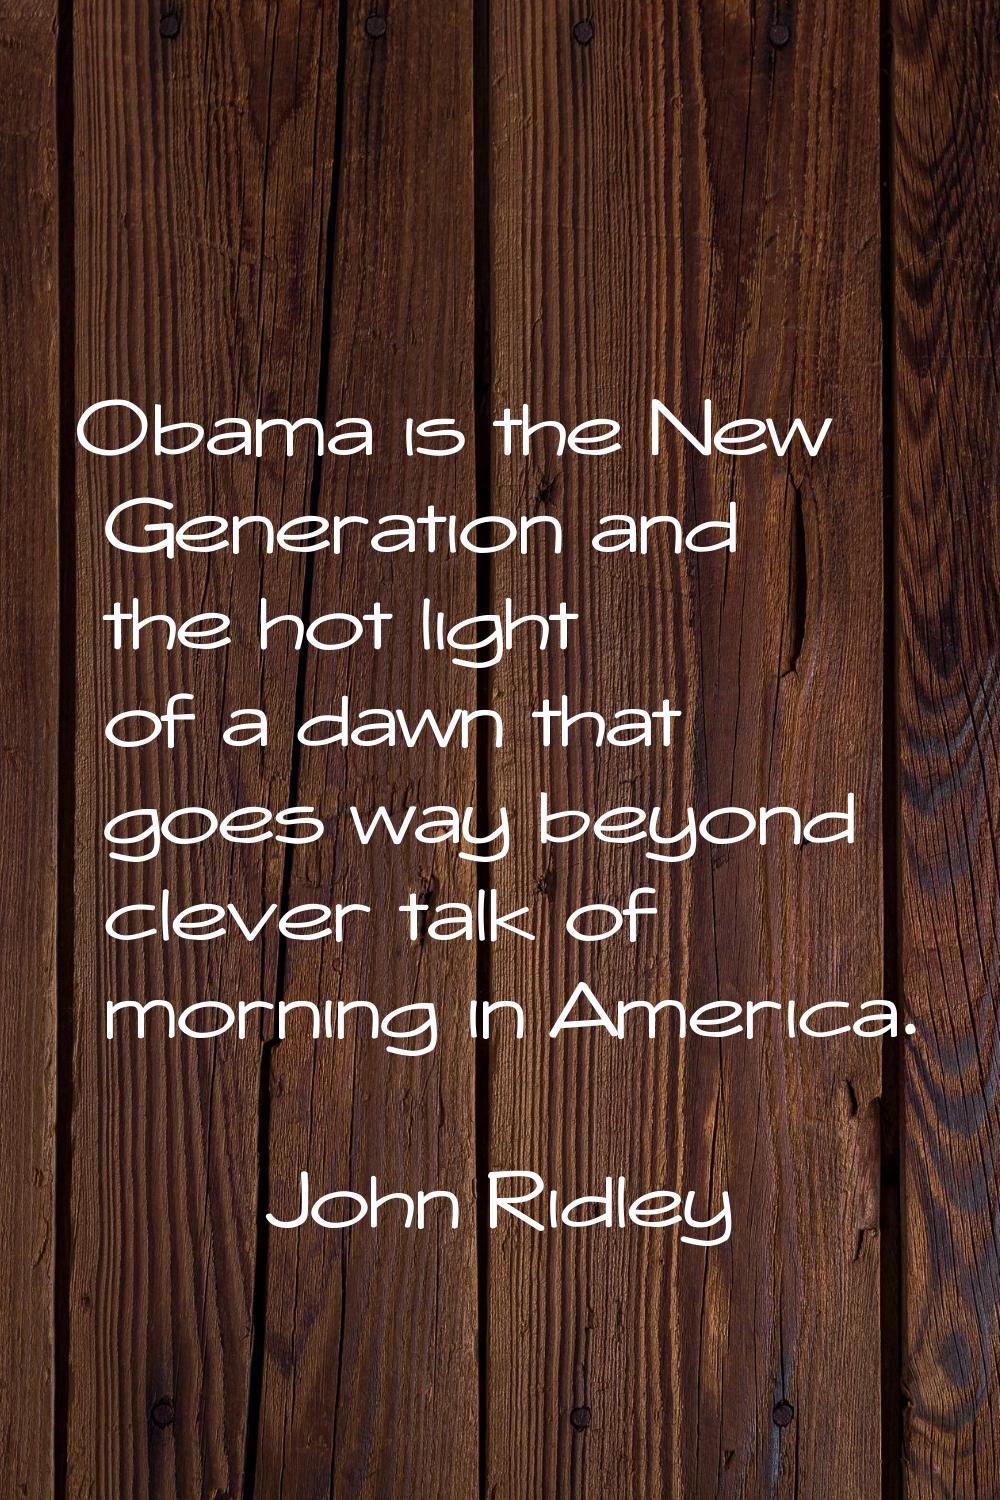 Obama is the New Generation and the hot light of a dawn that goes way beyond clever talk of morning